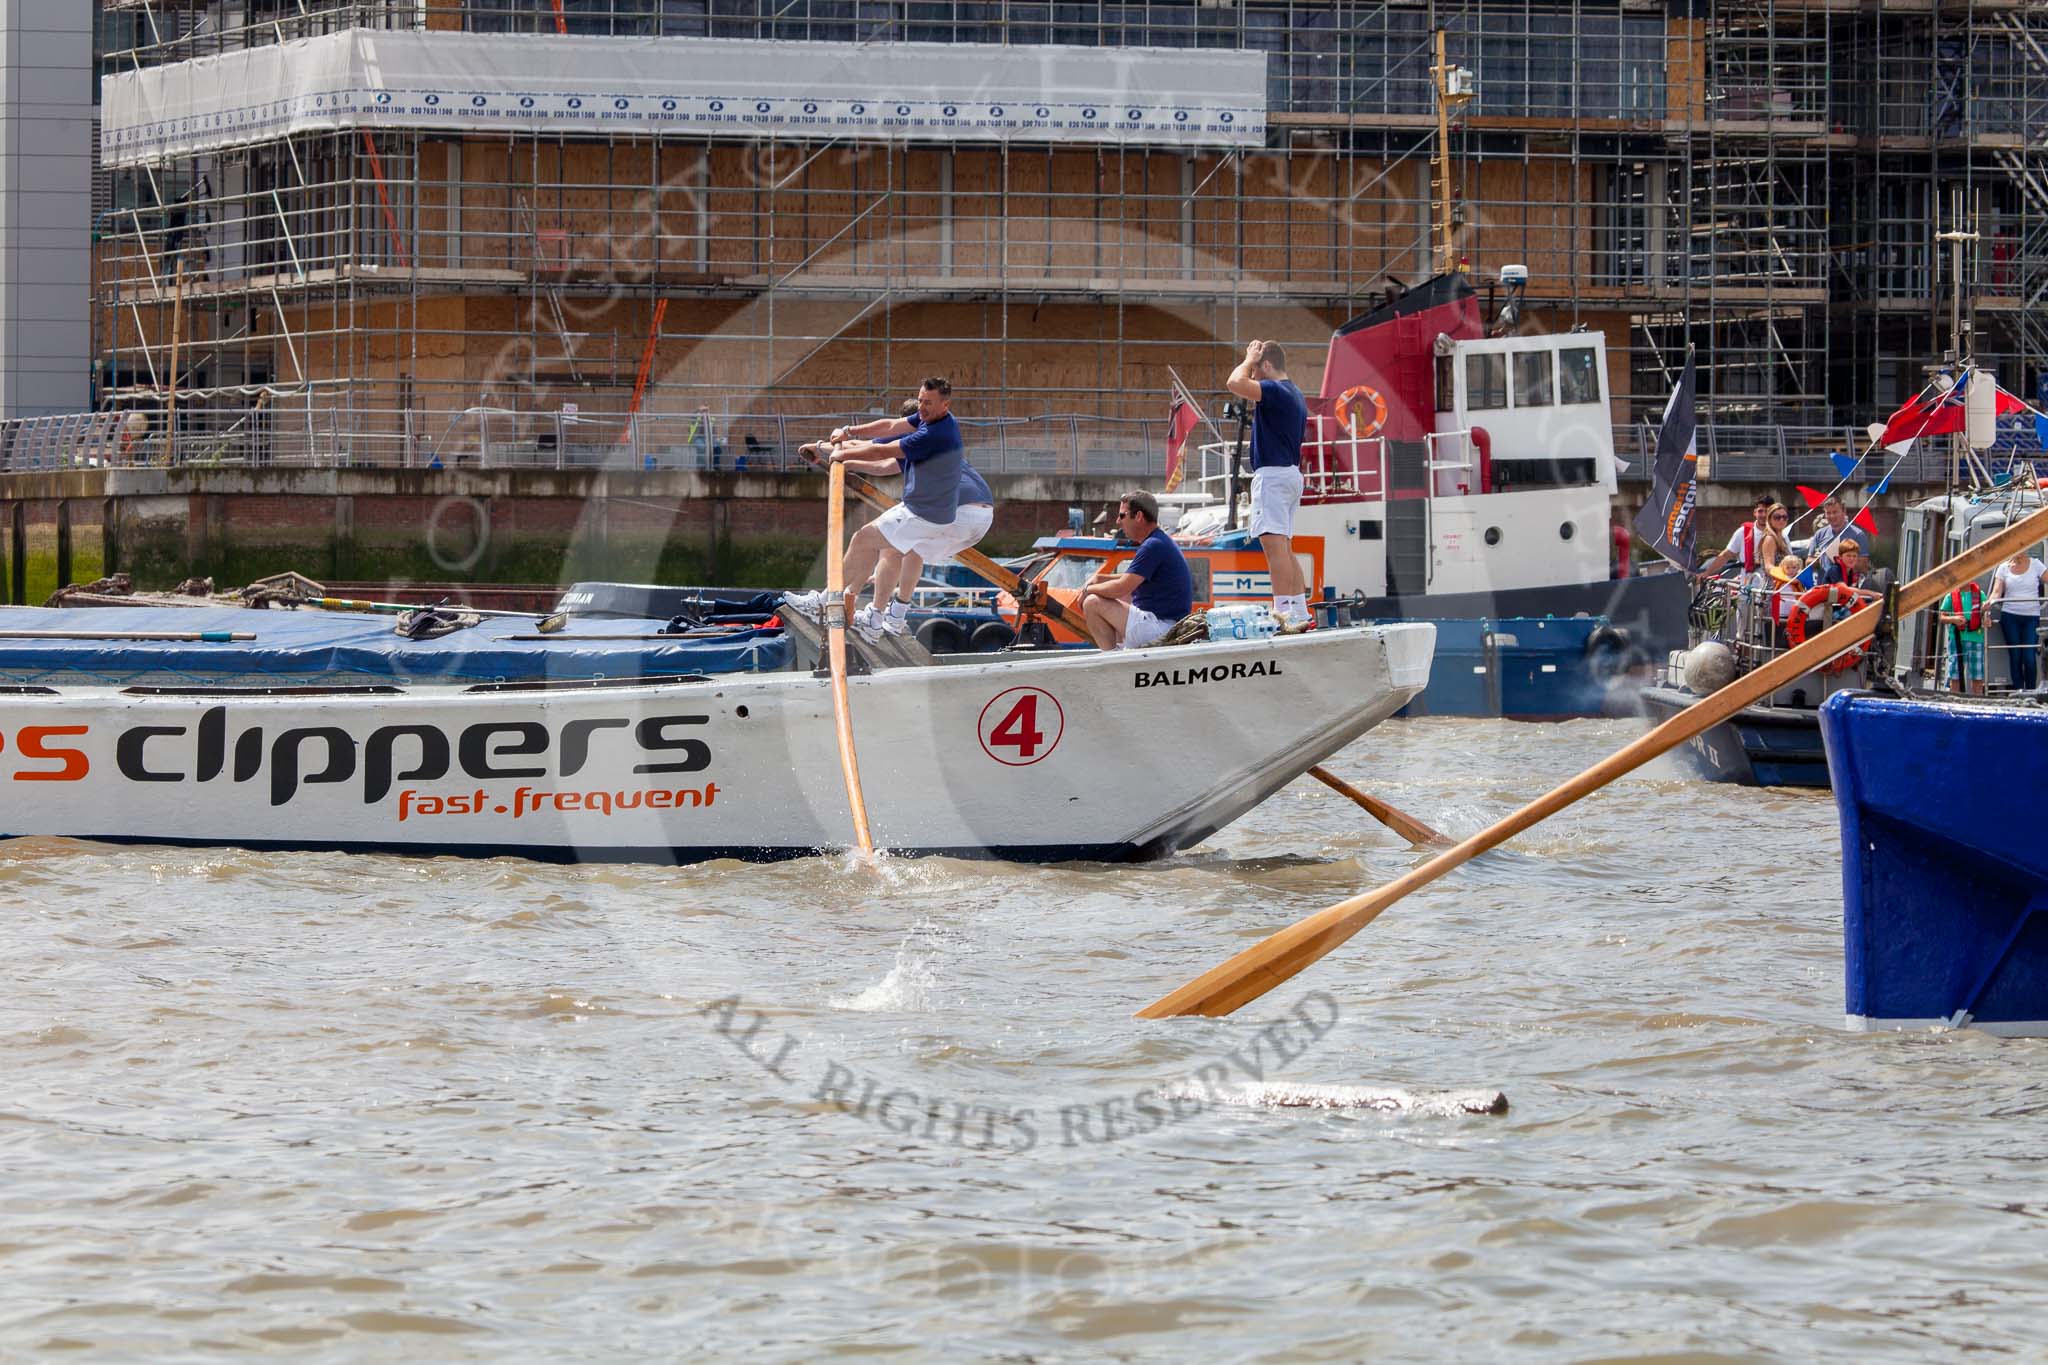 TOW River Thames Barge Driving Race 2014.
River Thames between Greenwich and Westminster,
London,

United Kingdom,
on 28 June 2014 at 12:23, image #52